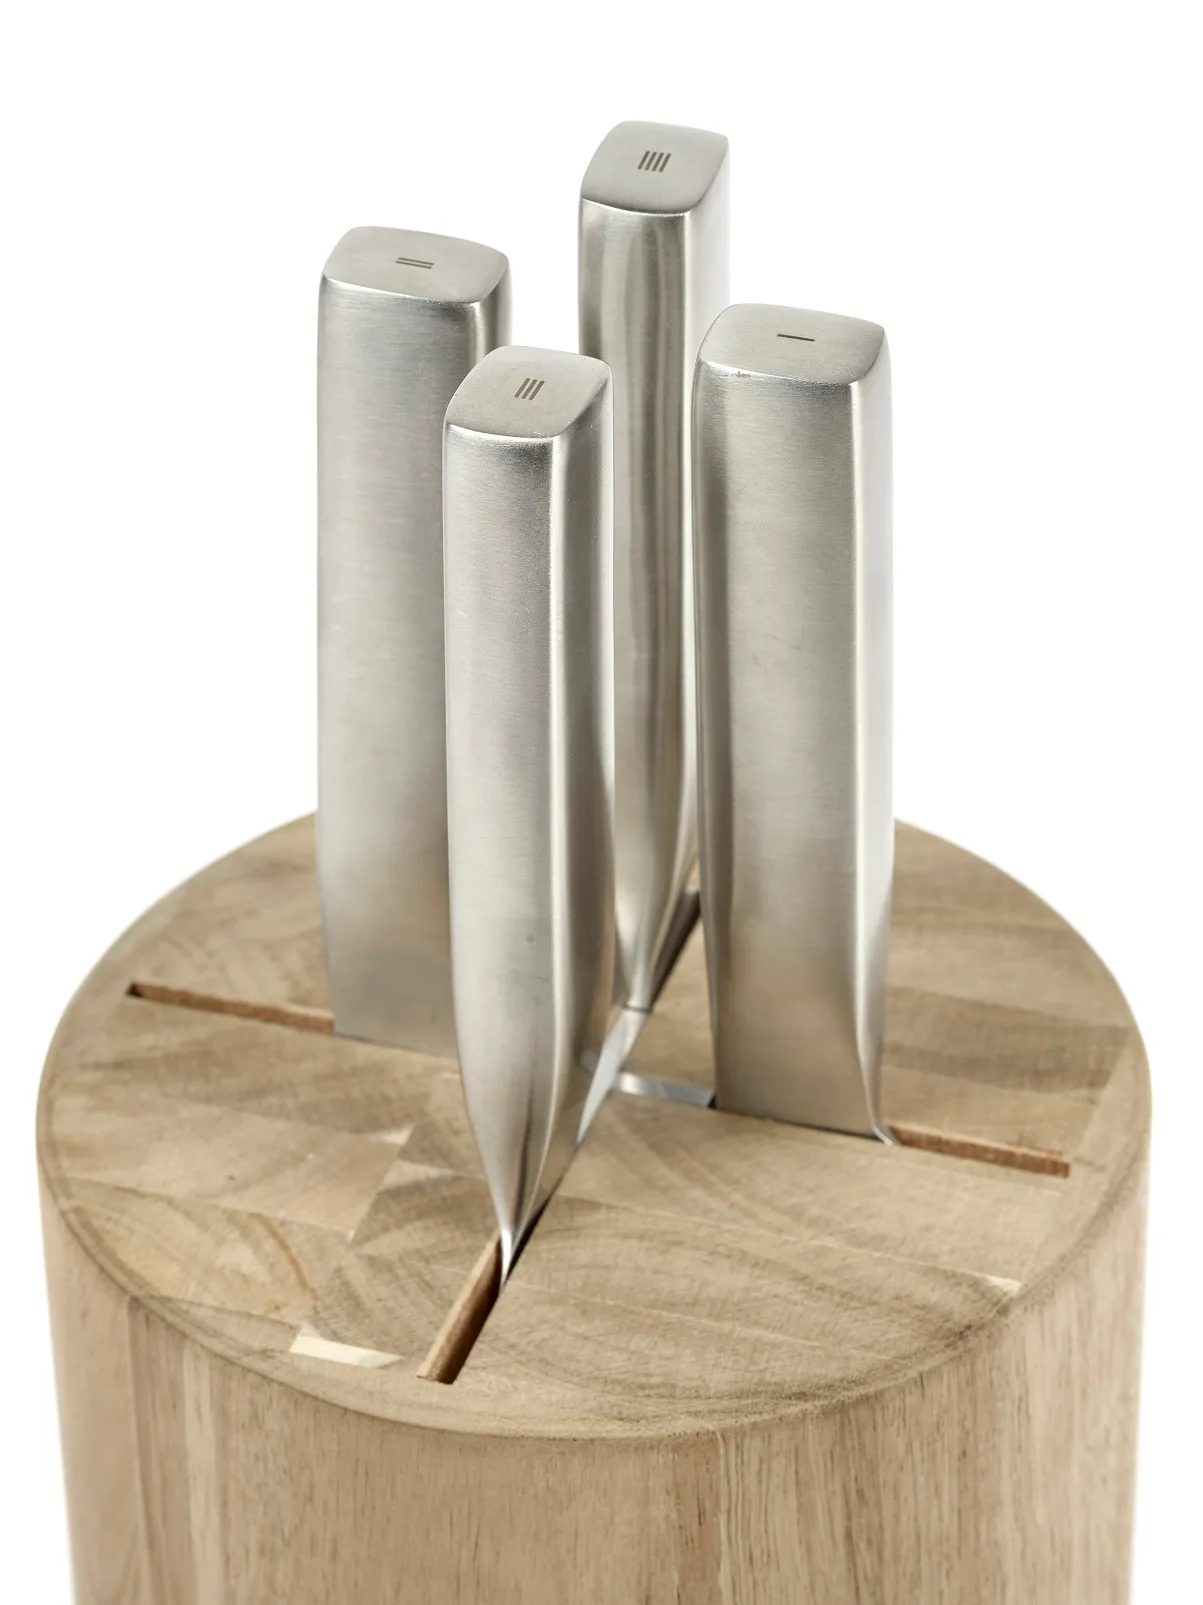 Knife Set Silver Plated - Wood Base Collection Serax L 16 W 16 H 35 CM